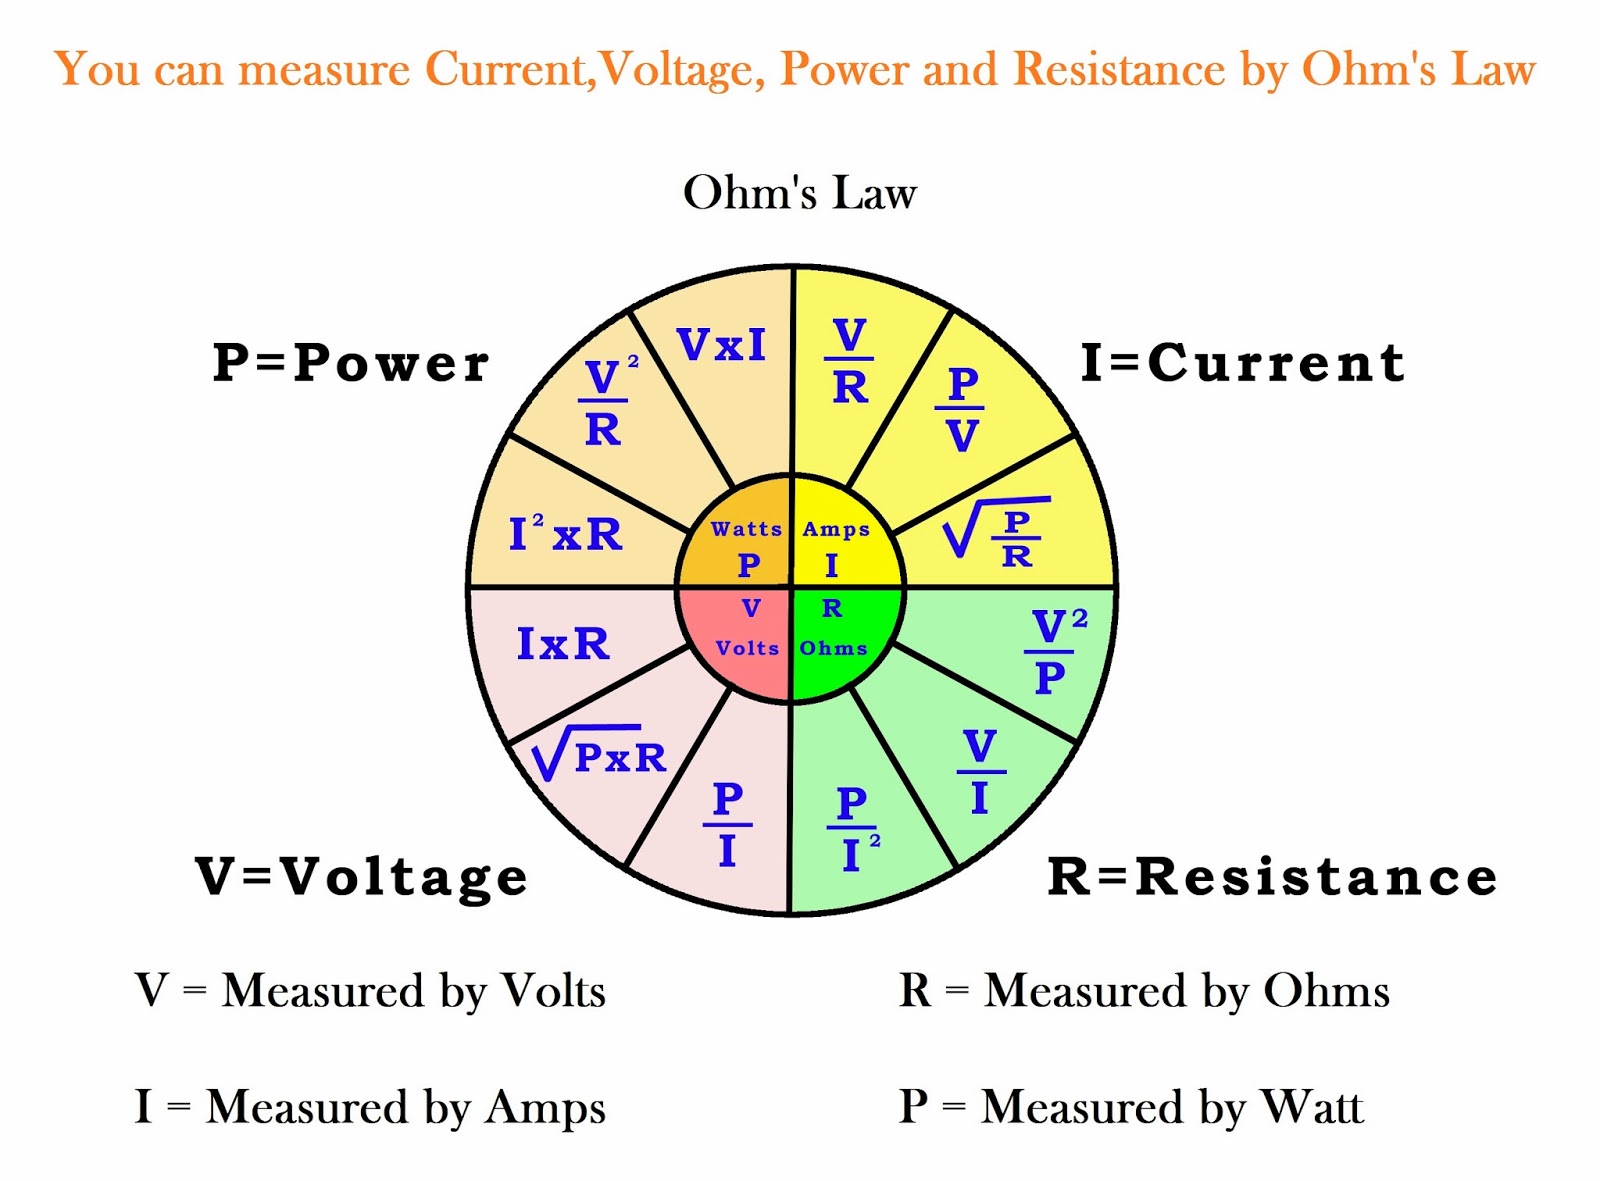 electrical-electronic-engineering-ohm-s-law-current-voltage-relationship-calculation-of-ohm